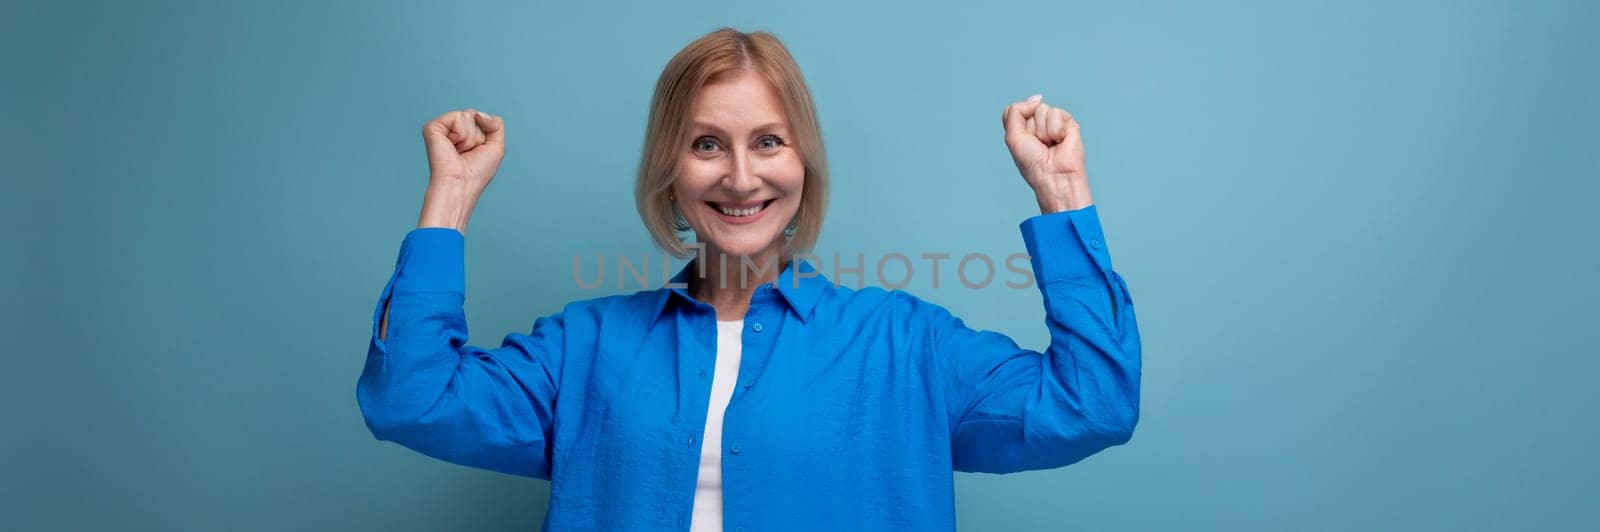 close-up of a joyful middle aged woman in a blue shirt on a blue background with copy space by TRMK